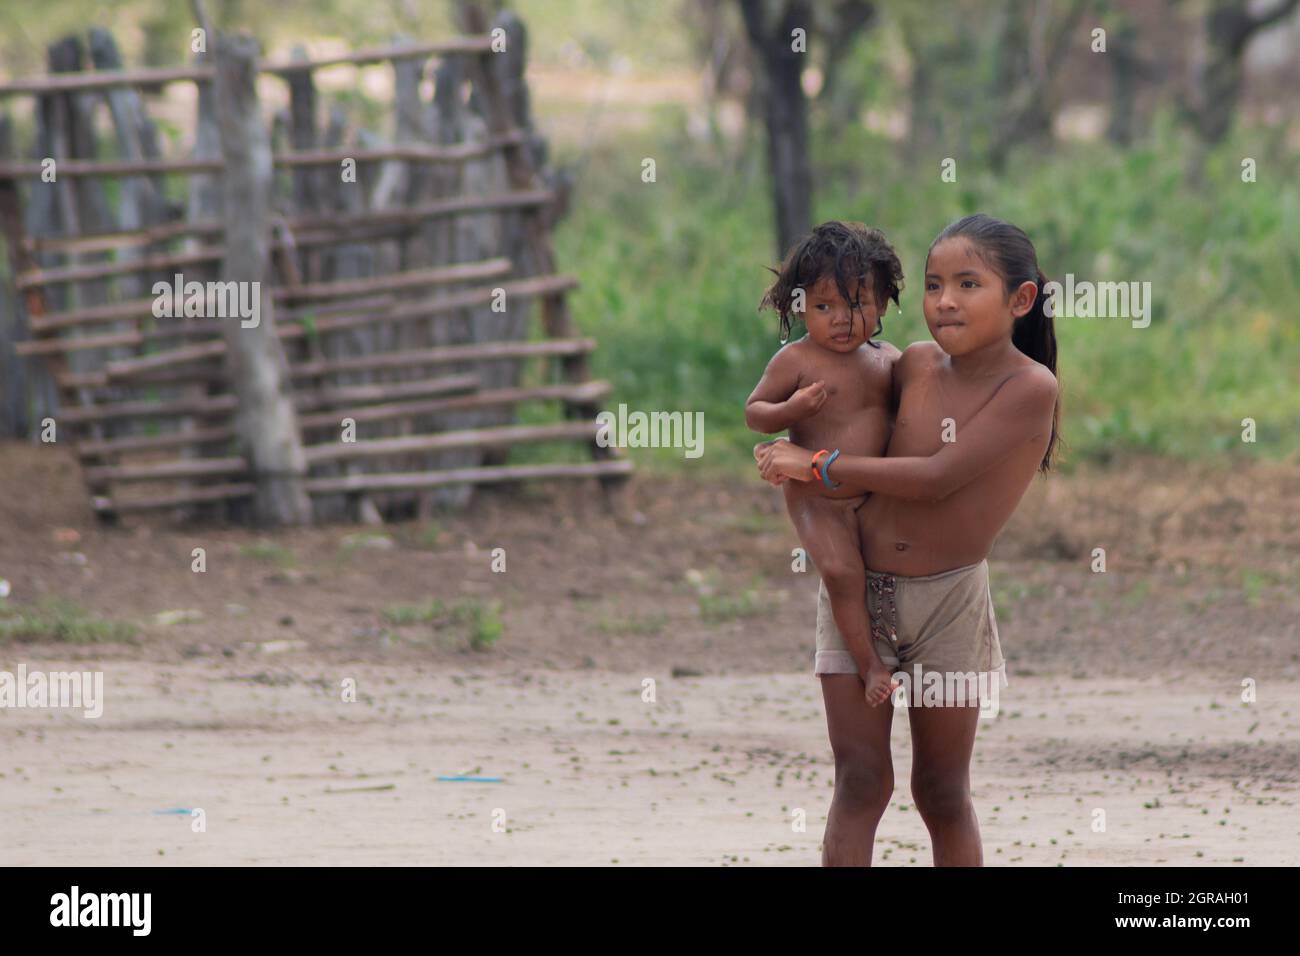 Mayapo, Colombia. 26th Sep, 2021. A small child holds her sisters on her arms during a Humanitarian Mission developed by 'De Corazon Guajira' in Mayapo at La Guajira - Colombia were they visited the Wayuu indigenous communities 'Pactalia, Poromana, Perrohuila' on September 26, 2021. The Guajira region in Colombia is the poorest region in Colombia, with its people commongly living without drinkable water, electricity and food. Credit: Long Visual Press/Alamy Live News Stock Photo